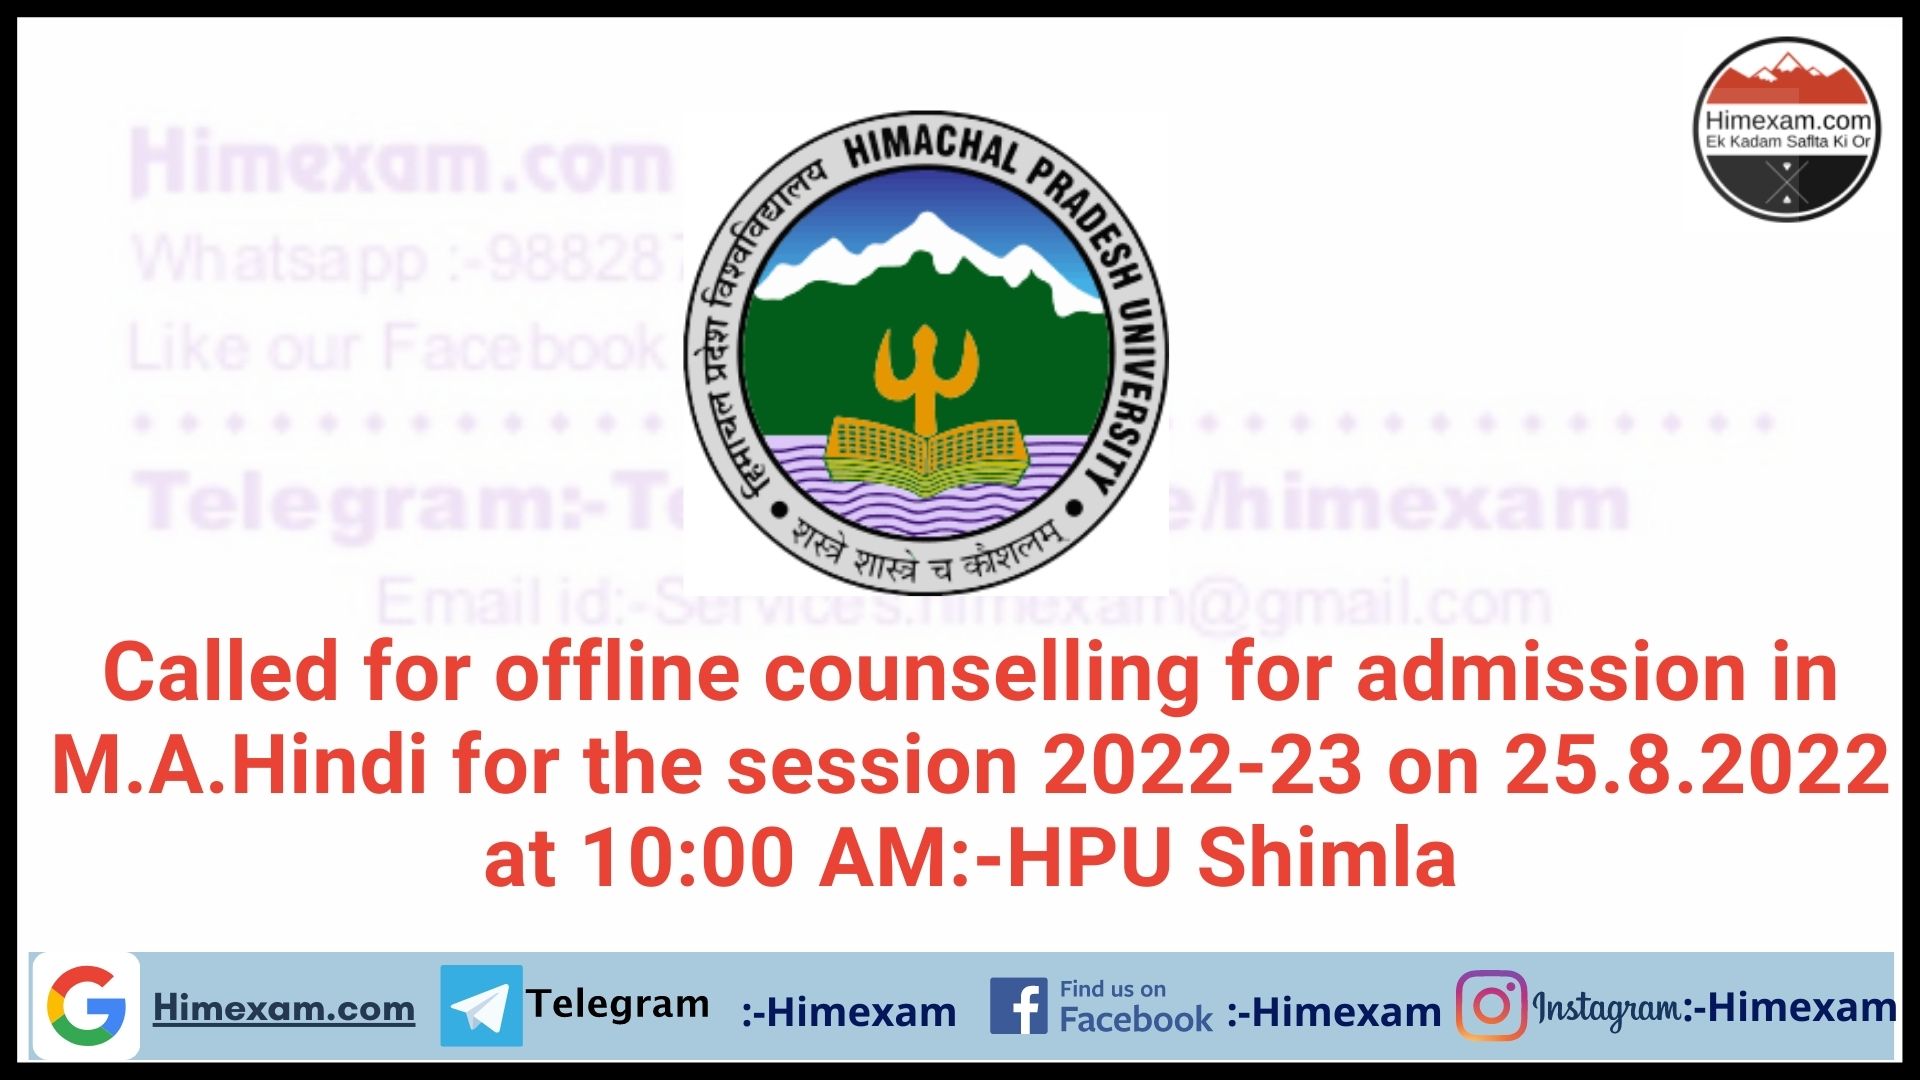 Called for offline councelling for admission in M.A.Hindi for the session 2022-23 on 25.8.2022 at 10:00 AM:-HPU Shimla